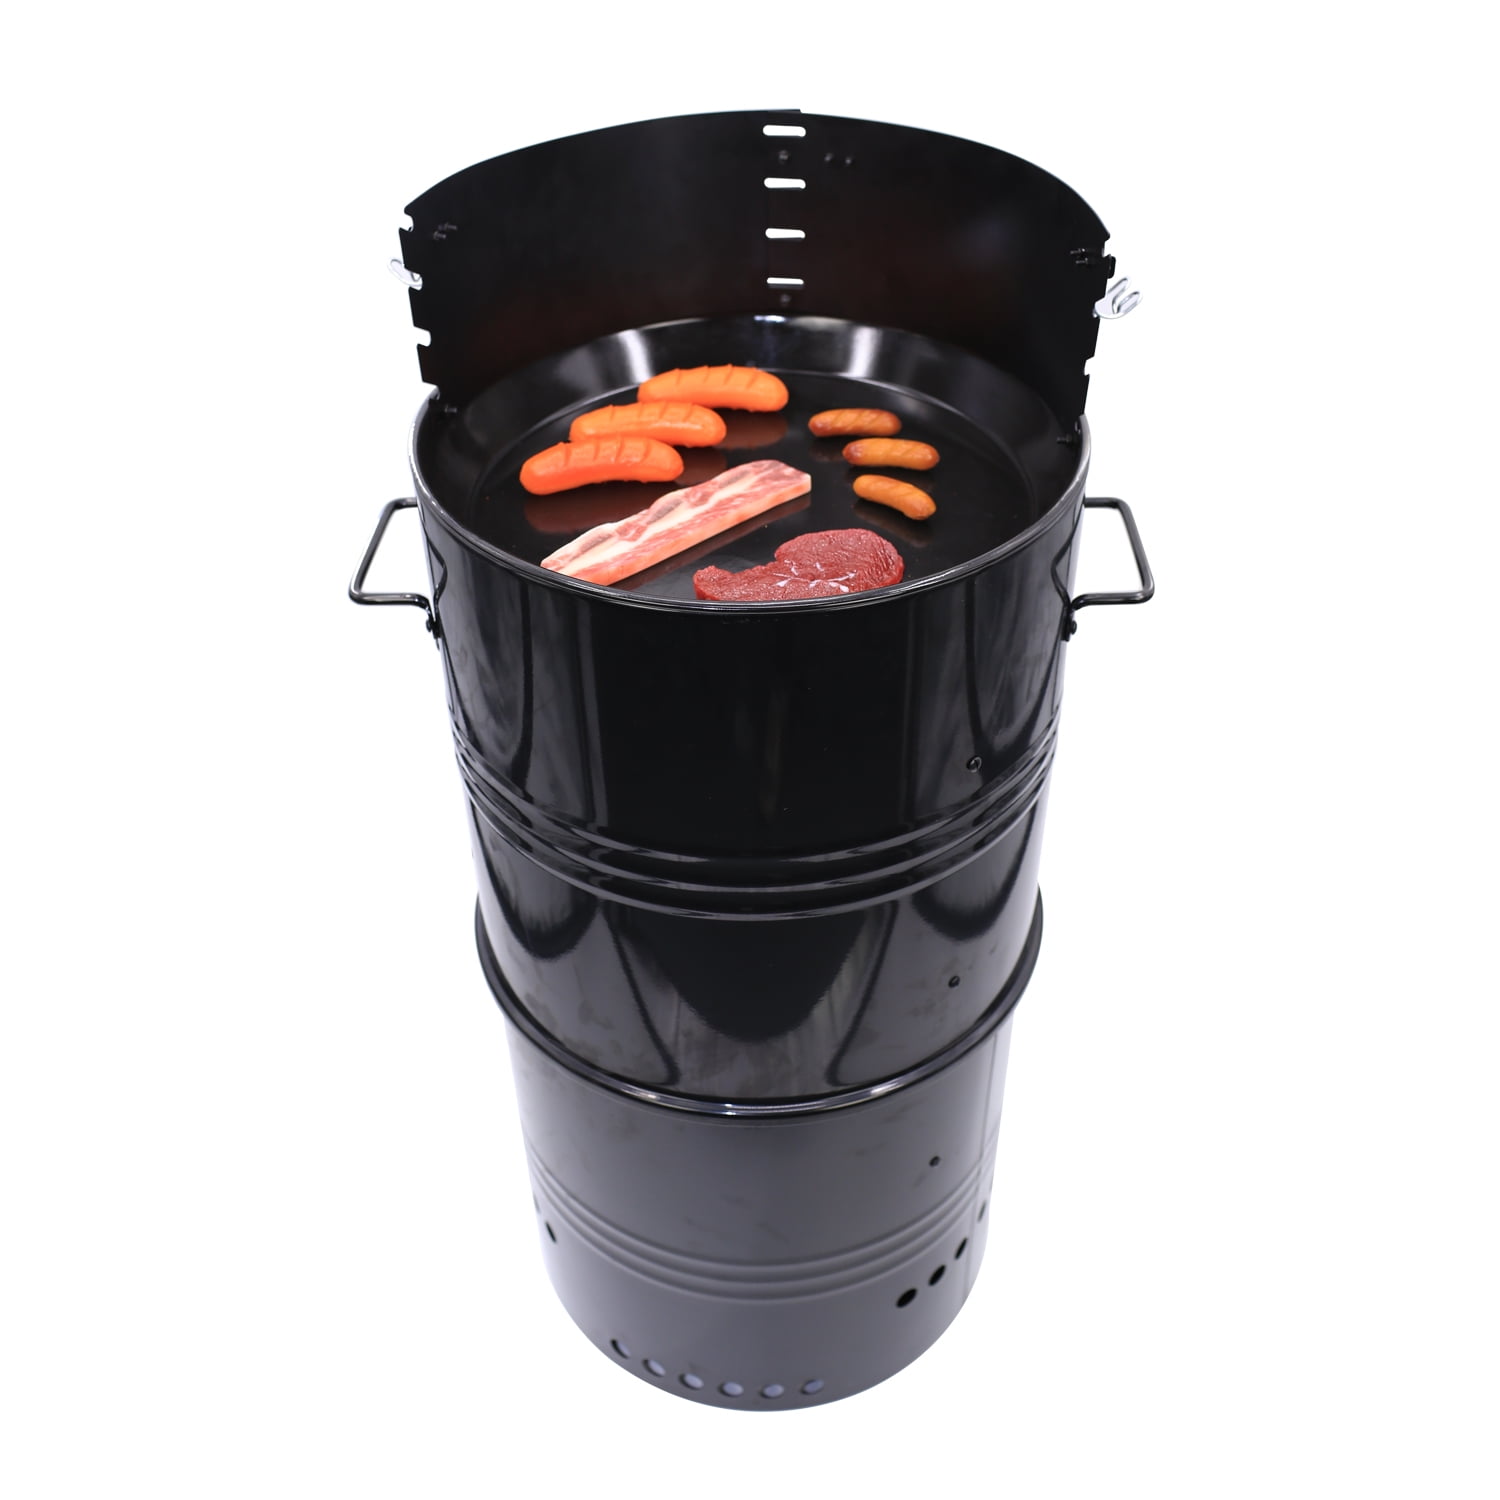 HAKKA Upgraded Commercial Vertical Electric Smoke oven for BBQ Grill  Outdoor Indoor Home Cooking Pastrami, Sausage, Bacon, Smoked Chicken,  Smoked Pork